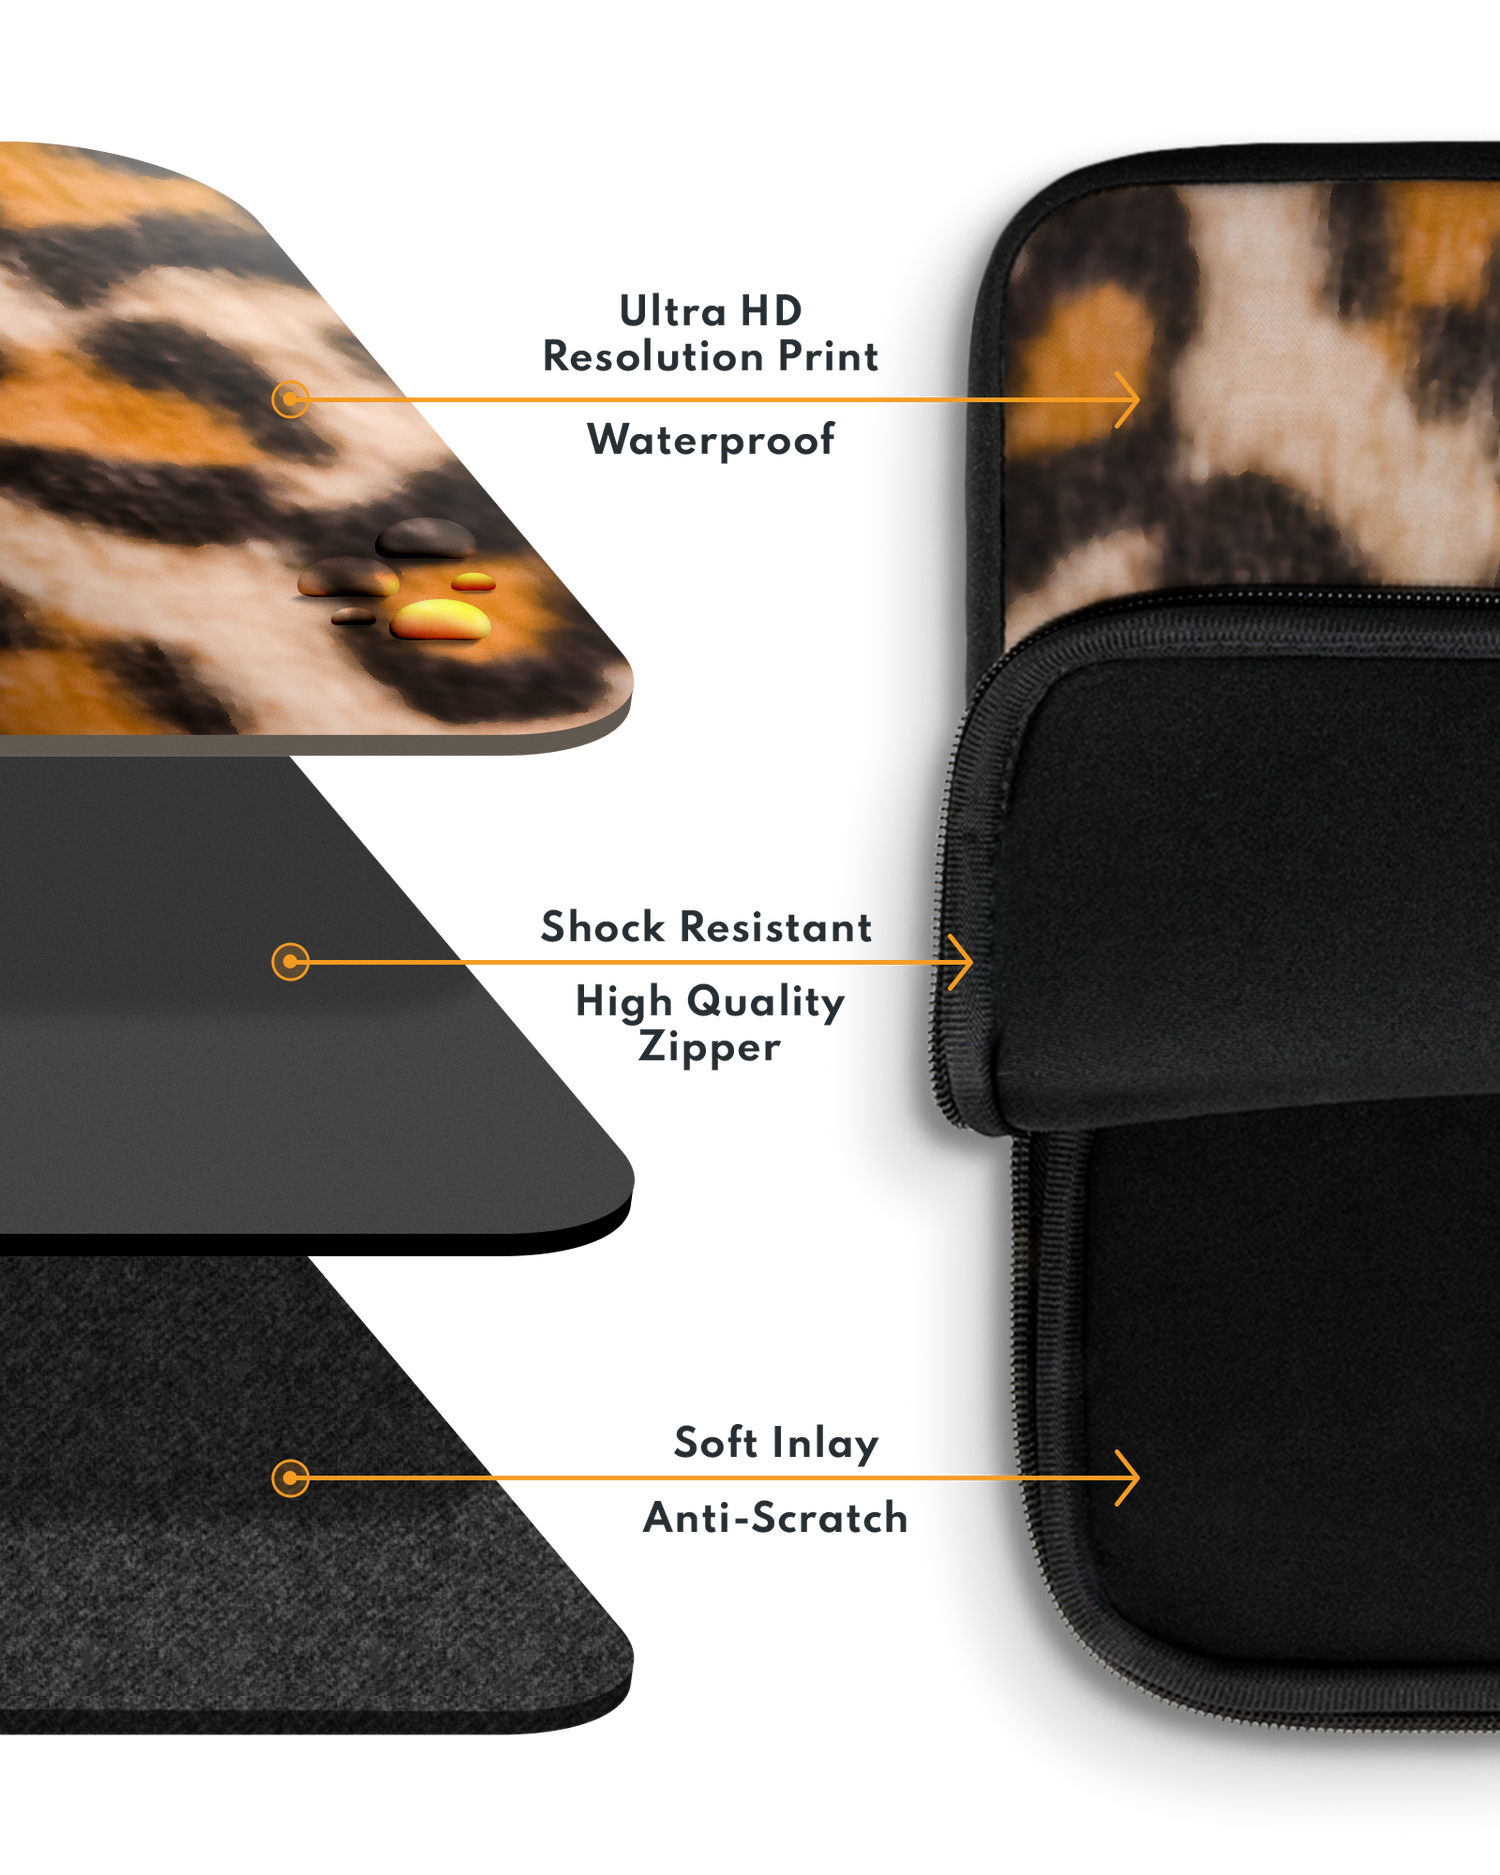 Leopard Pattern Laptop Case 13-14 inch with soft inner lining